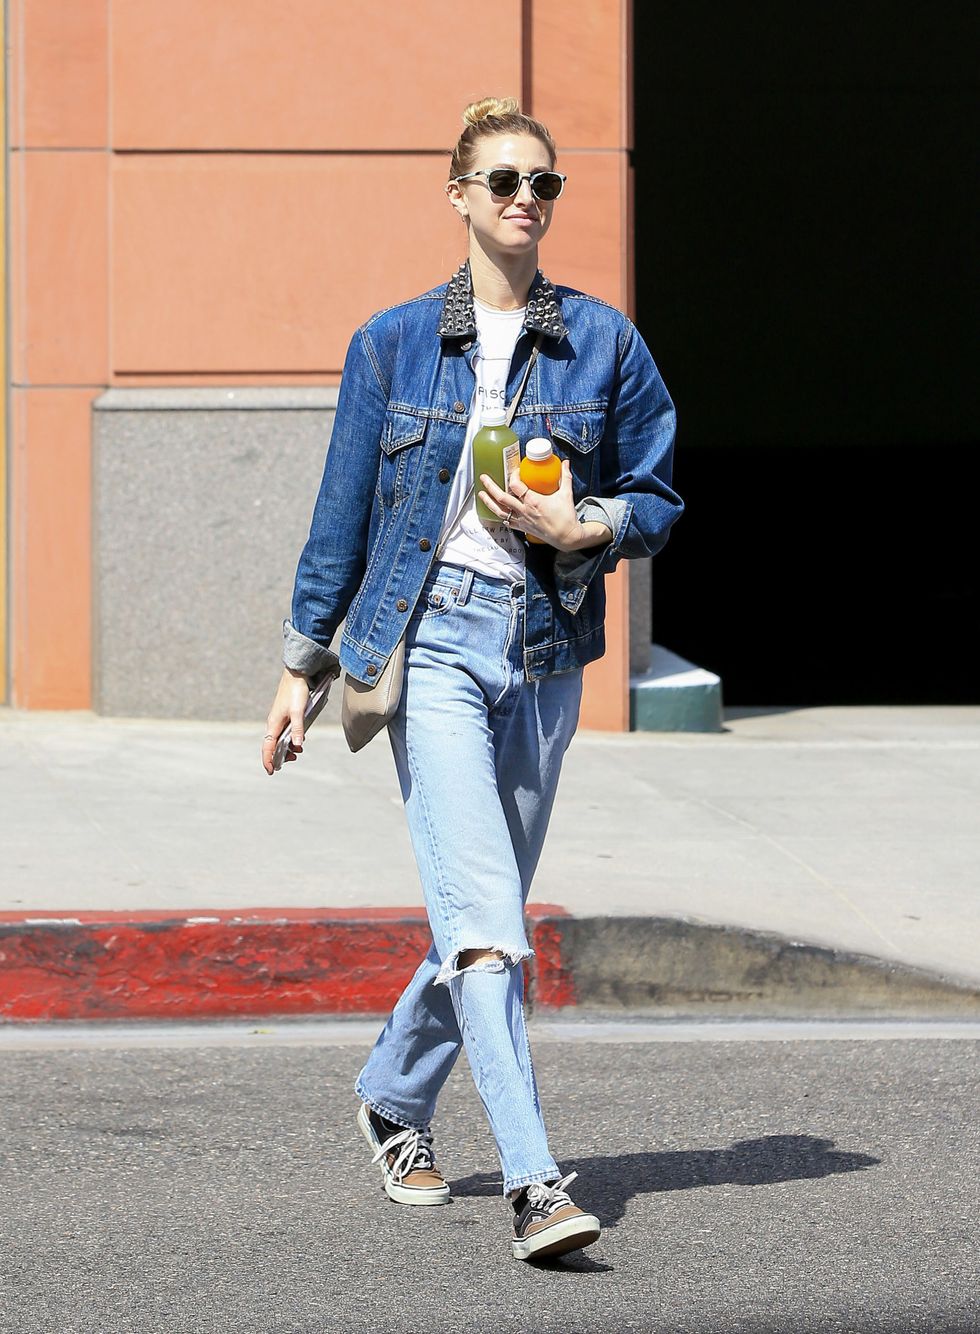 Dress by Number: Alessandra Ambrosio's Double Denim and Hermes Belt